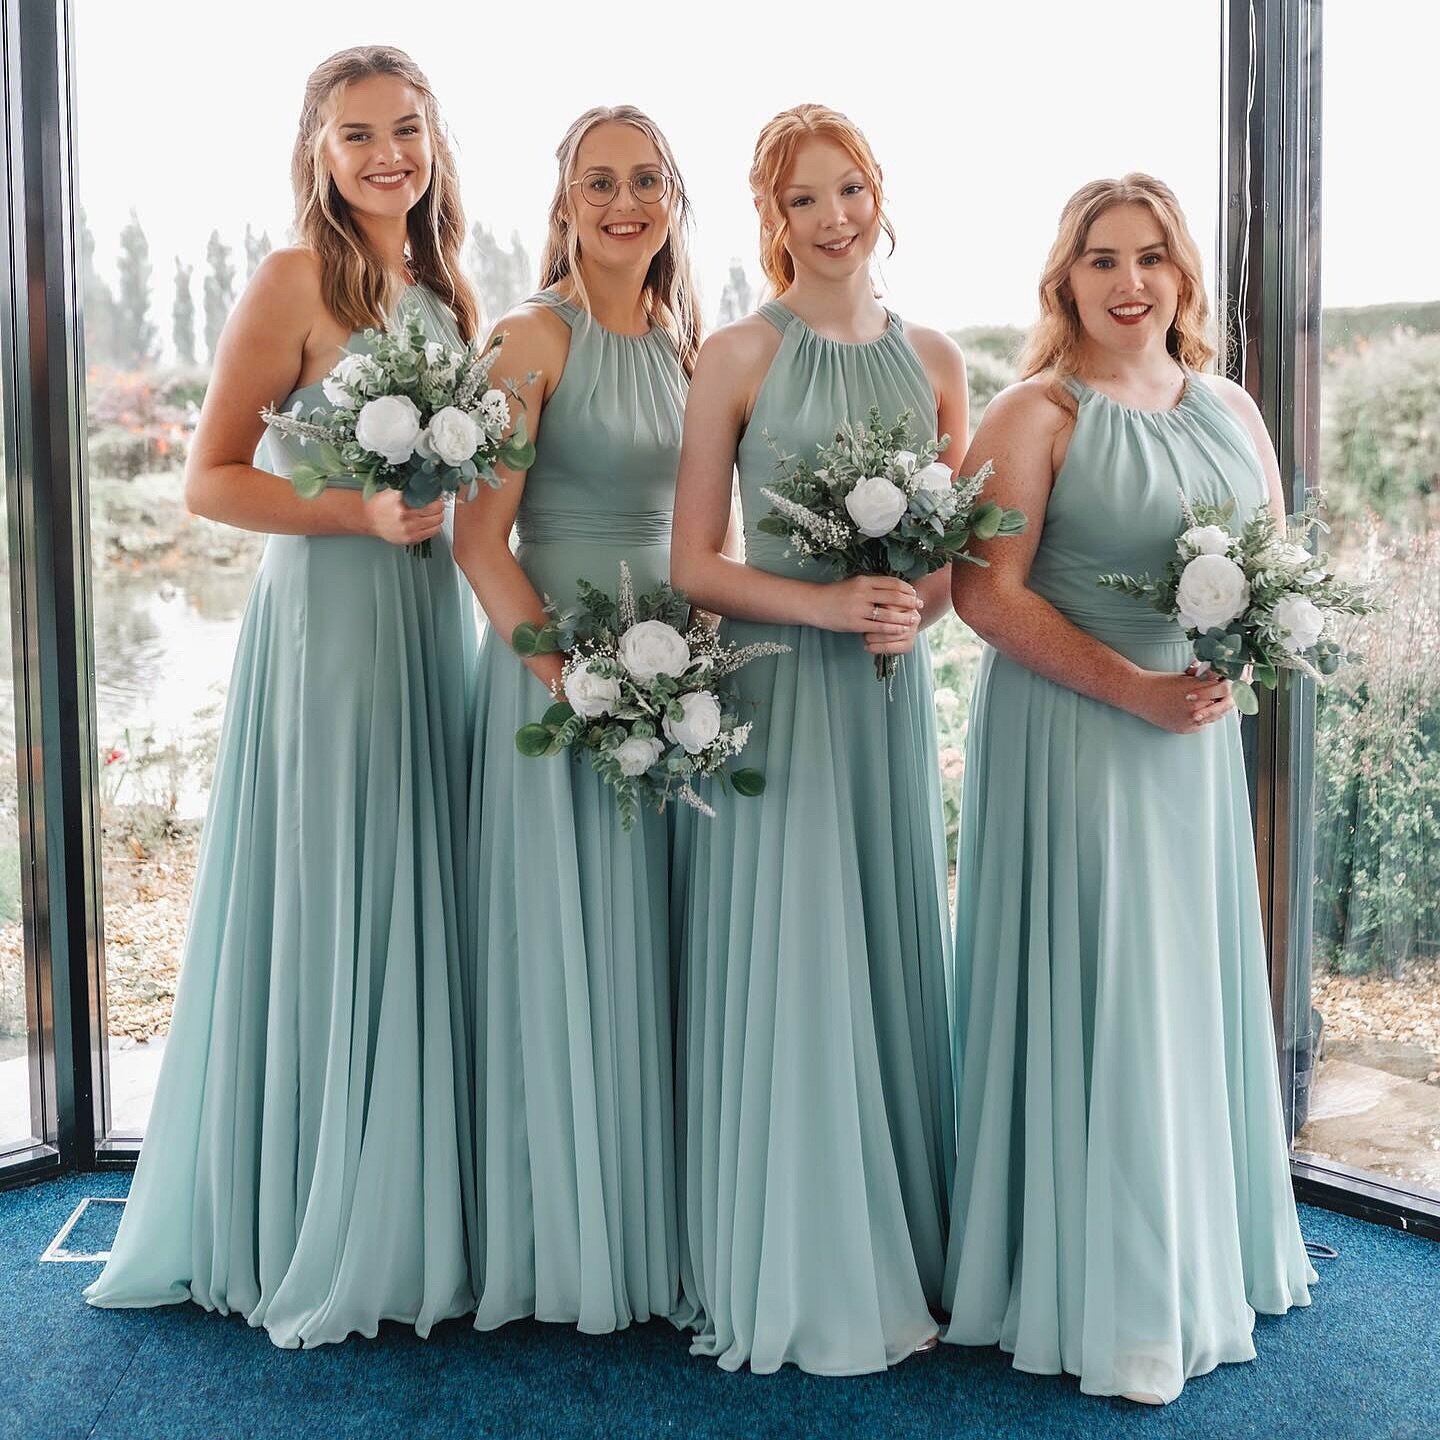 The beauty of these smiles 🤩

Bridesmaids wearing:

Dress: 6760 - @dessygroup 
Colour: Willow Green
Fabric: Chiffon

Beautifully traditional with the floatiest skirt ⭐️

#bridesmaiddresses #bridesmaidsdresses #bridetobe2024 #bridesmaidsinspo #dessyb